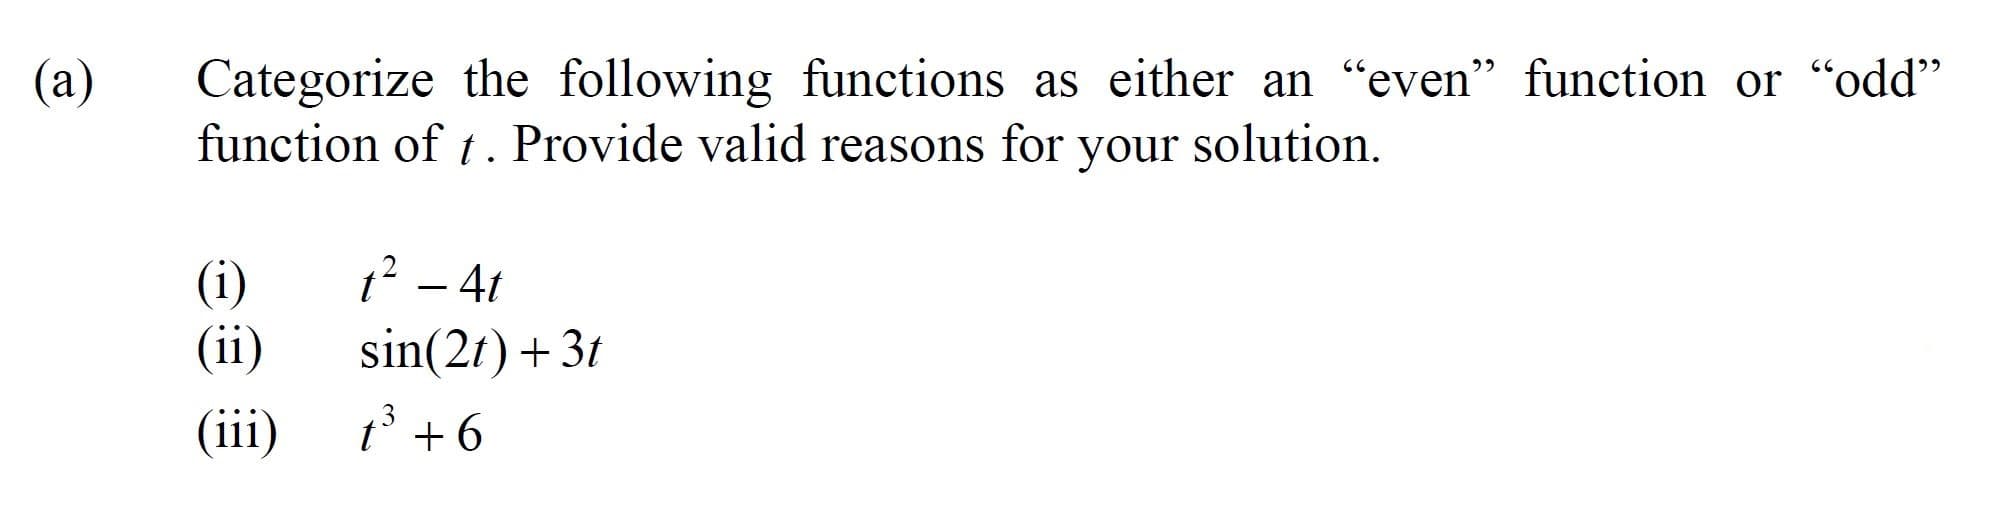 Categorize the following functions as either an "even" function or "odd"
function of t. Provide valid reasons for your solution.
(a)
1? – 4t
sin(2t) +3t
(i)
11
(ii)
(iii)
t° + 6
